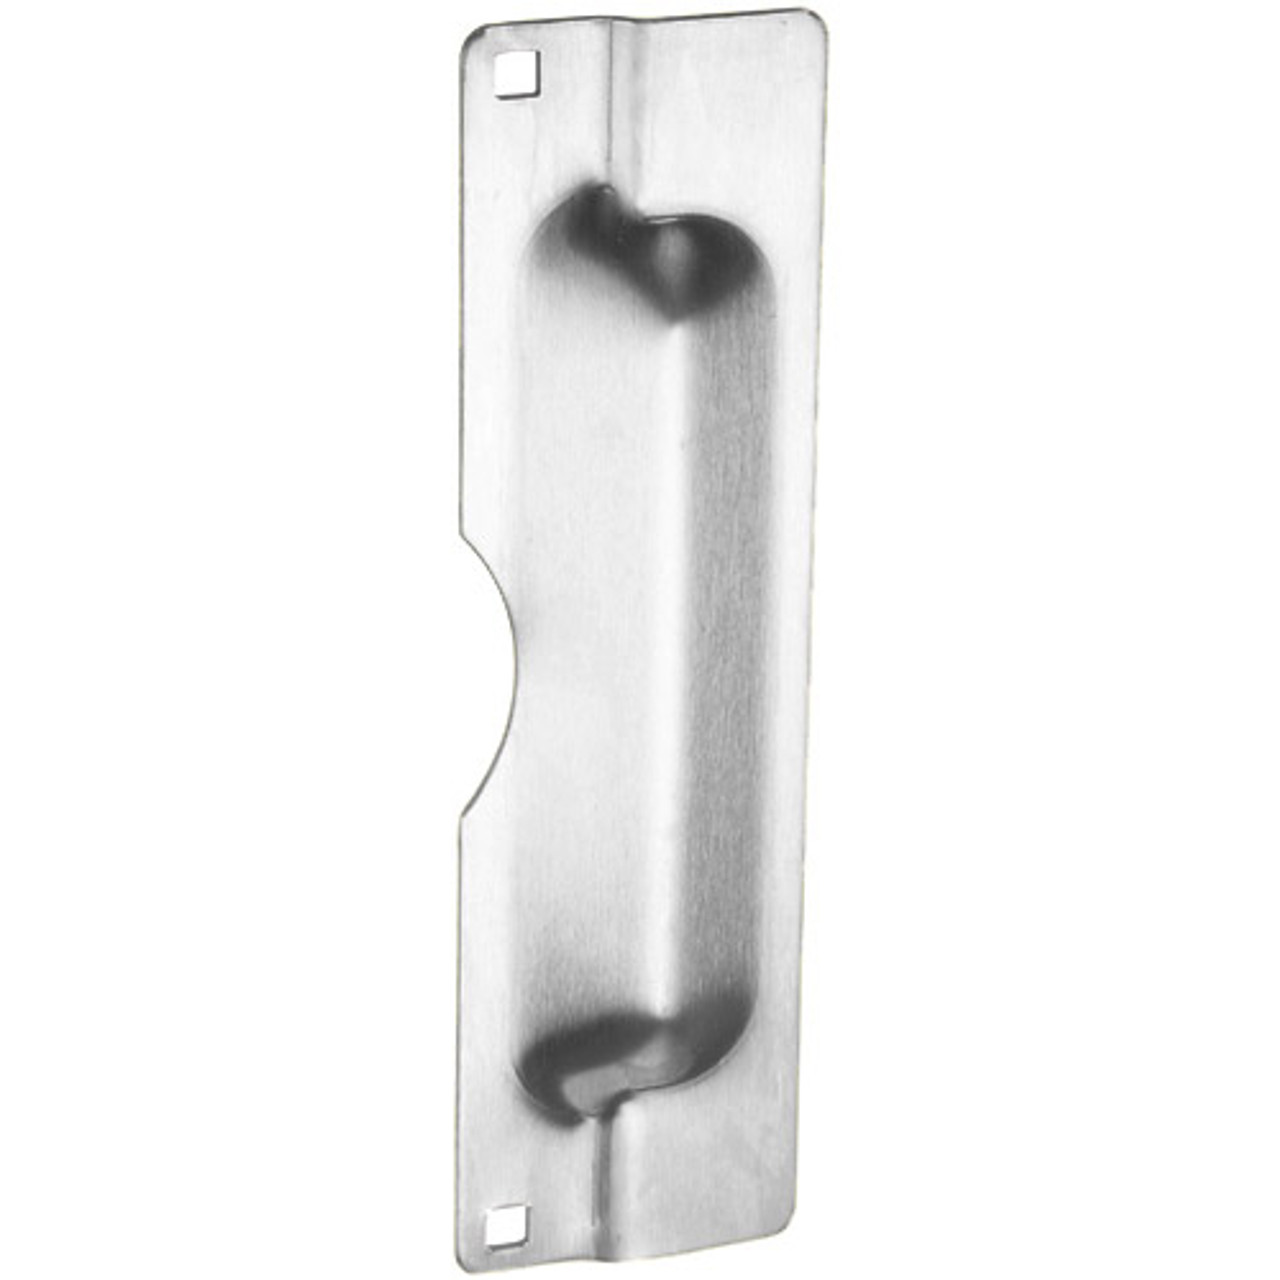 PLP-211-SL Don Jo Latch Protector in Silver Coated Finish